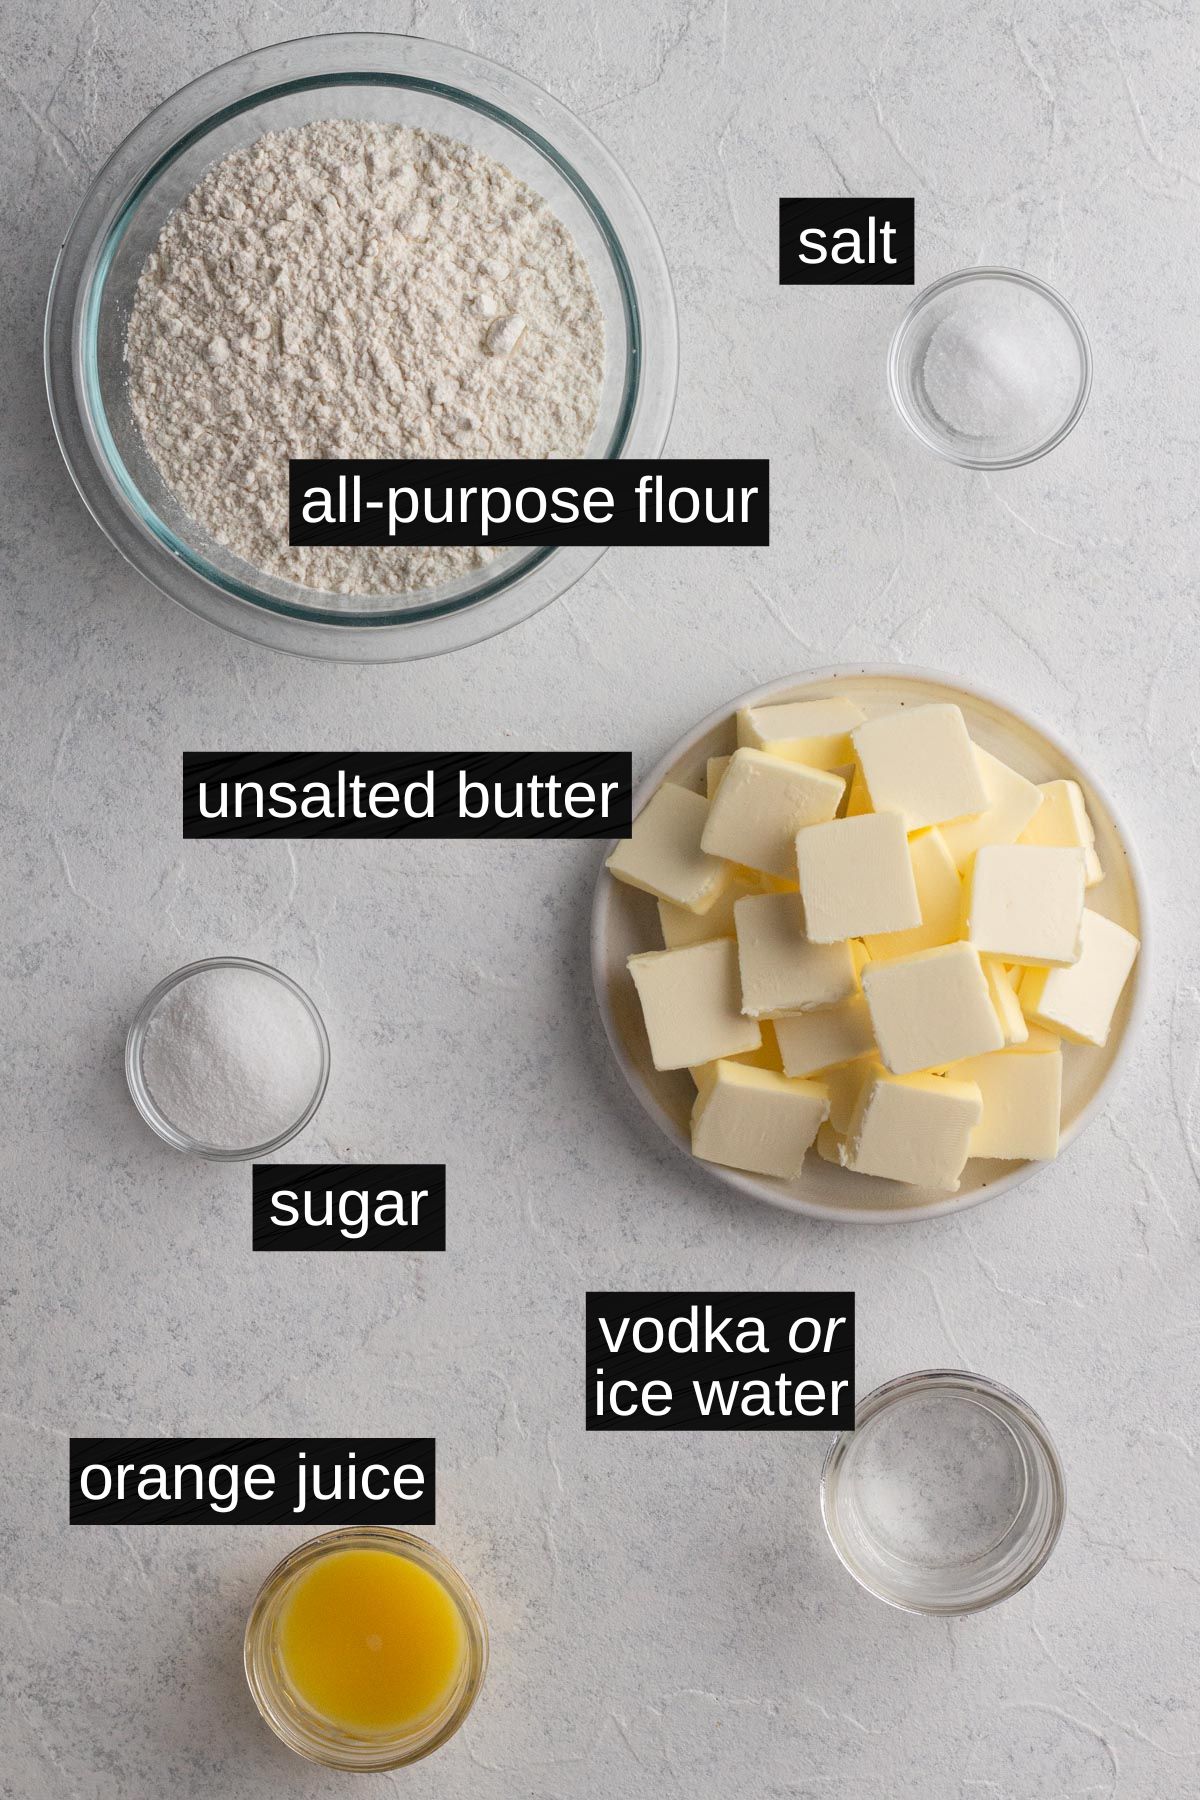 Recipe ingredients with labels on a white background.